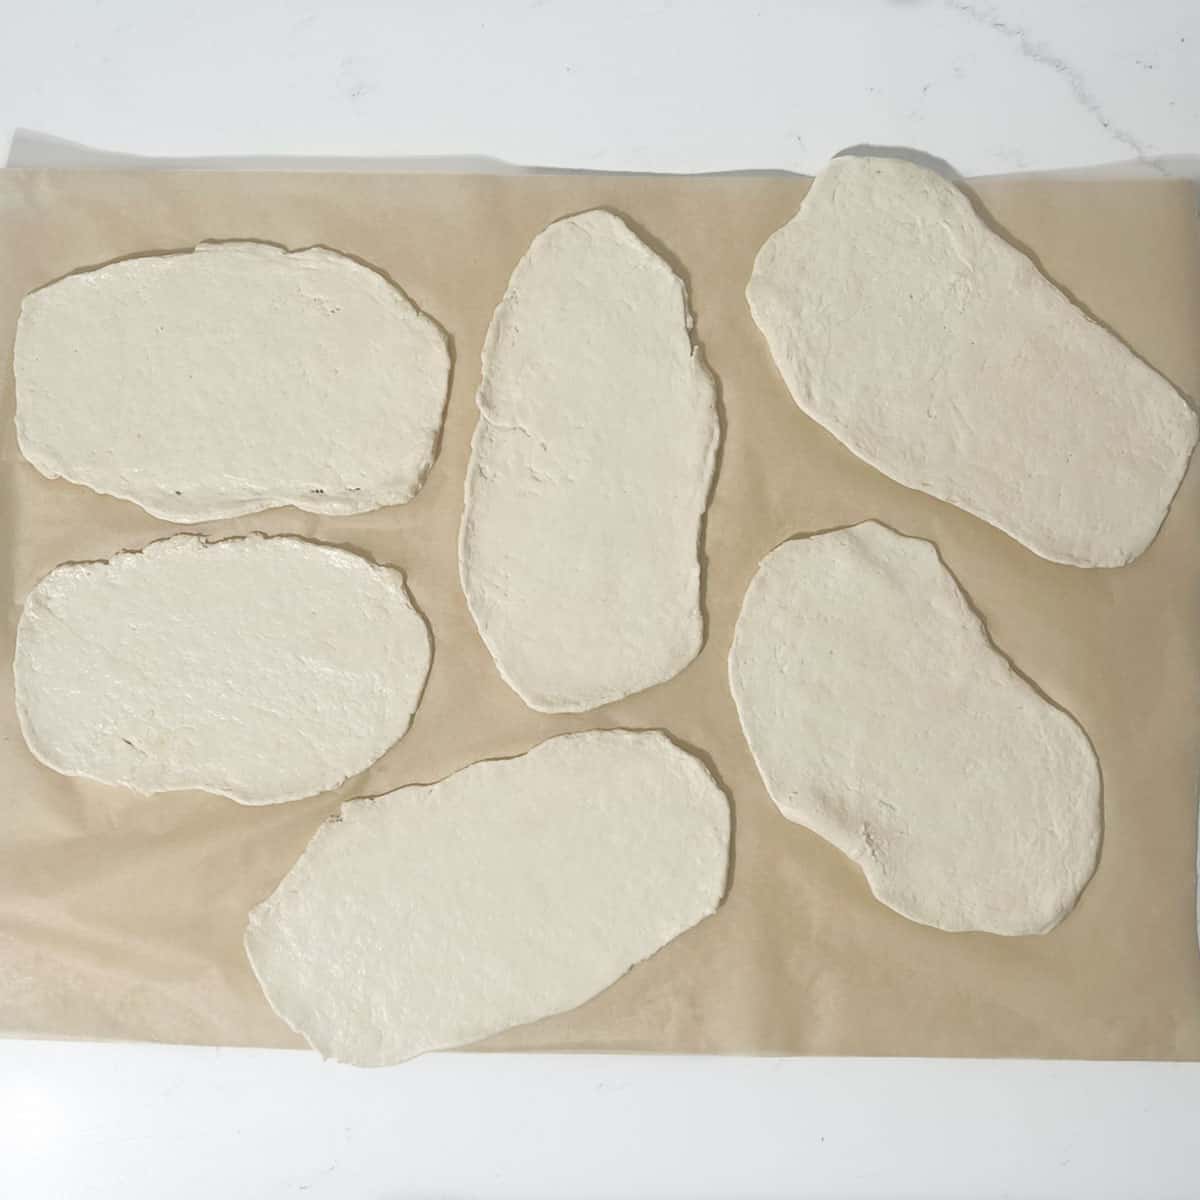 Rolled out flatbreads on baking paper.